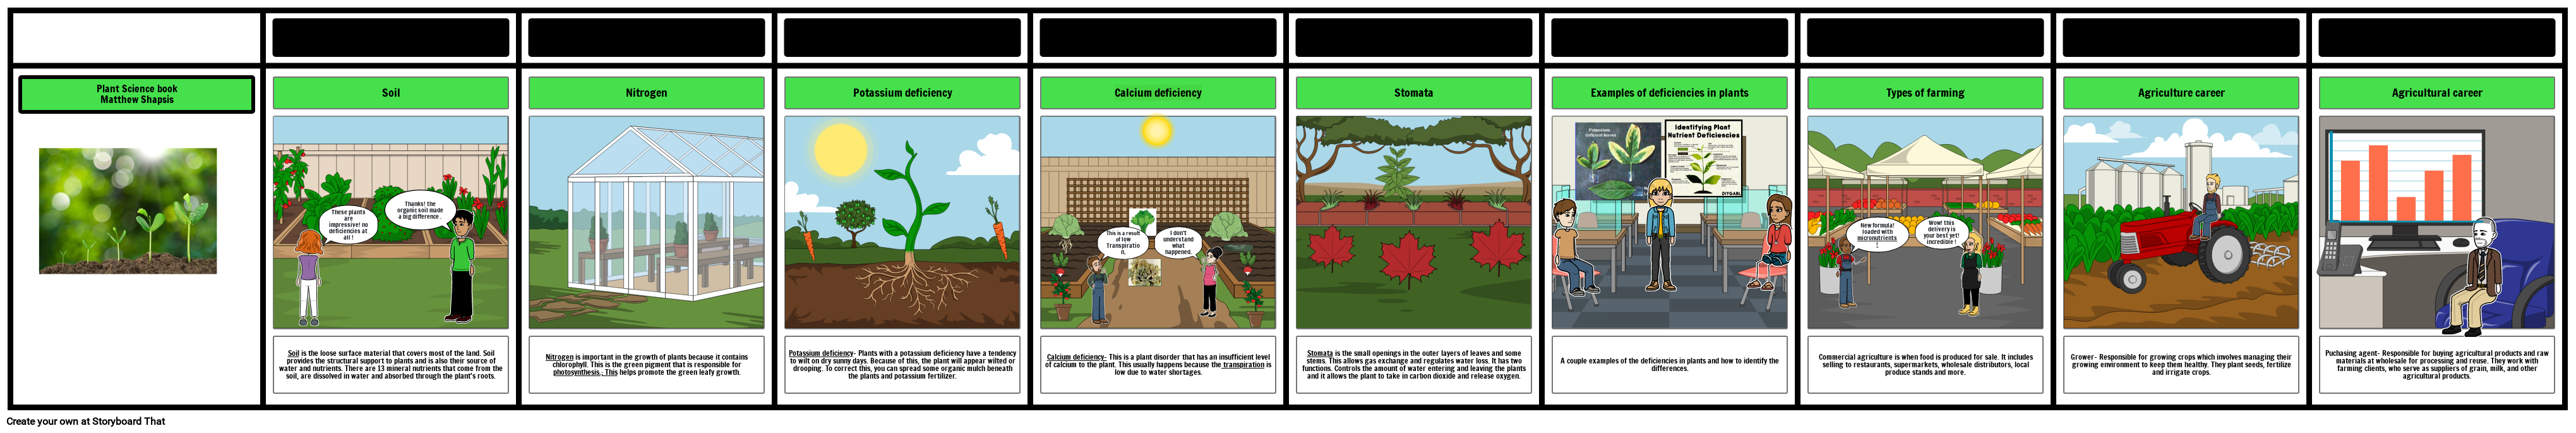 Plant Science Kids book-final project